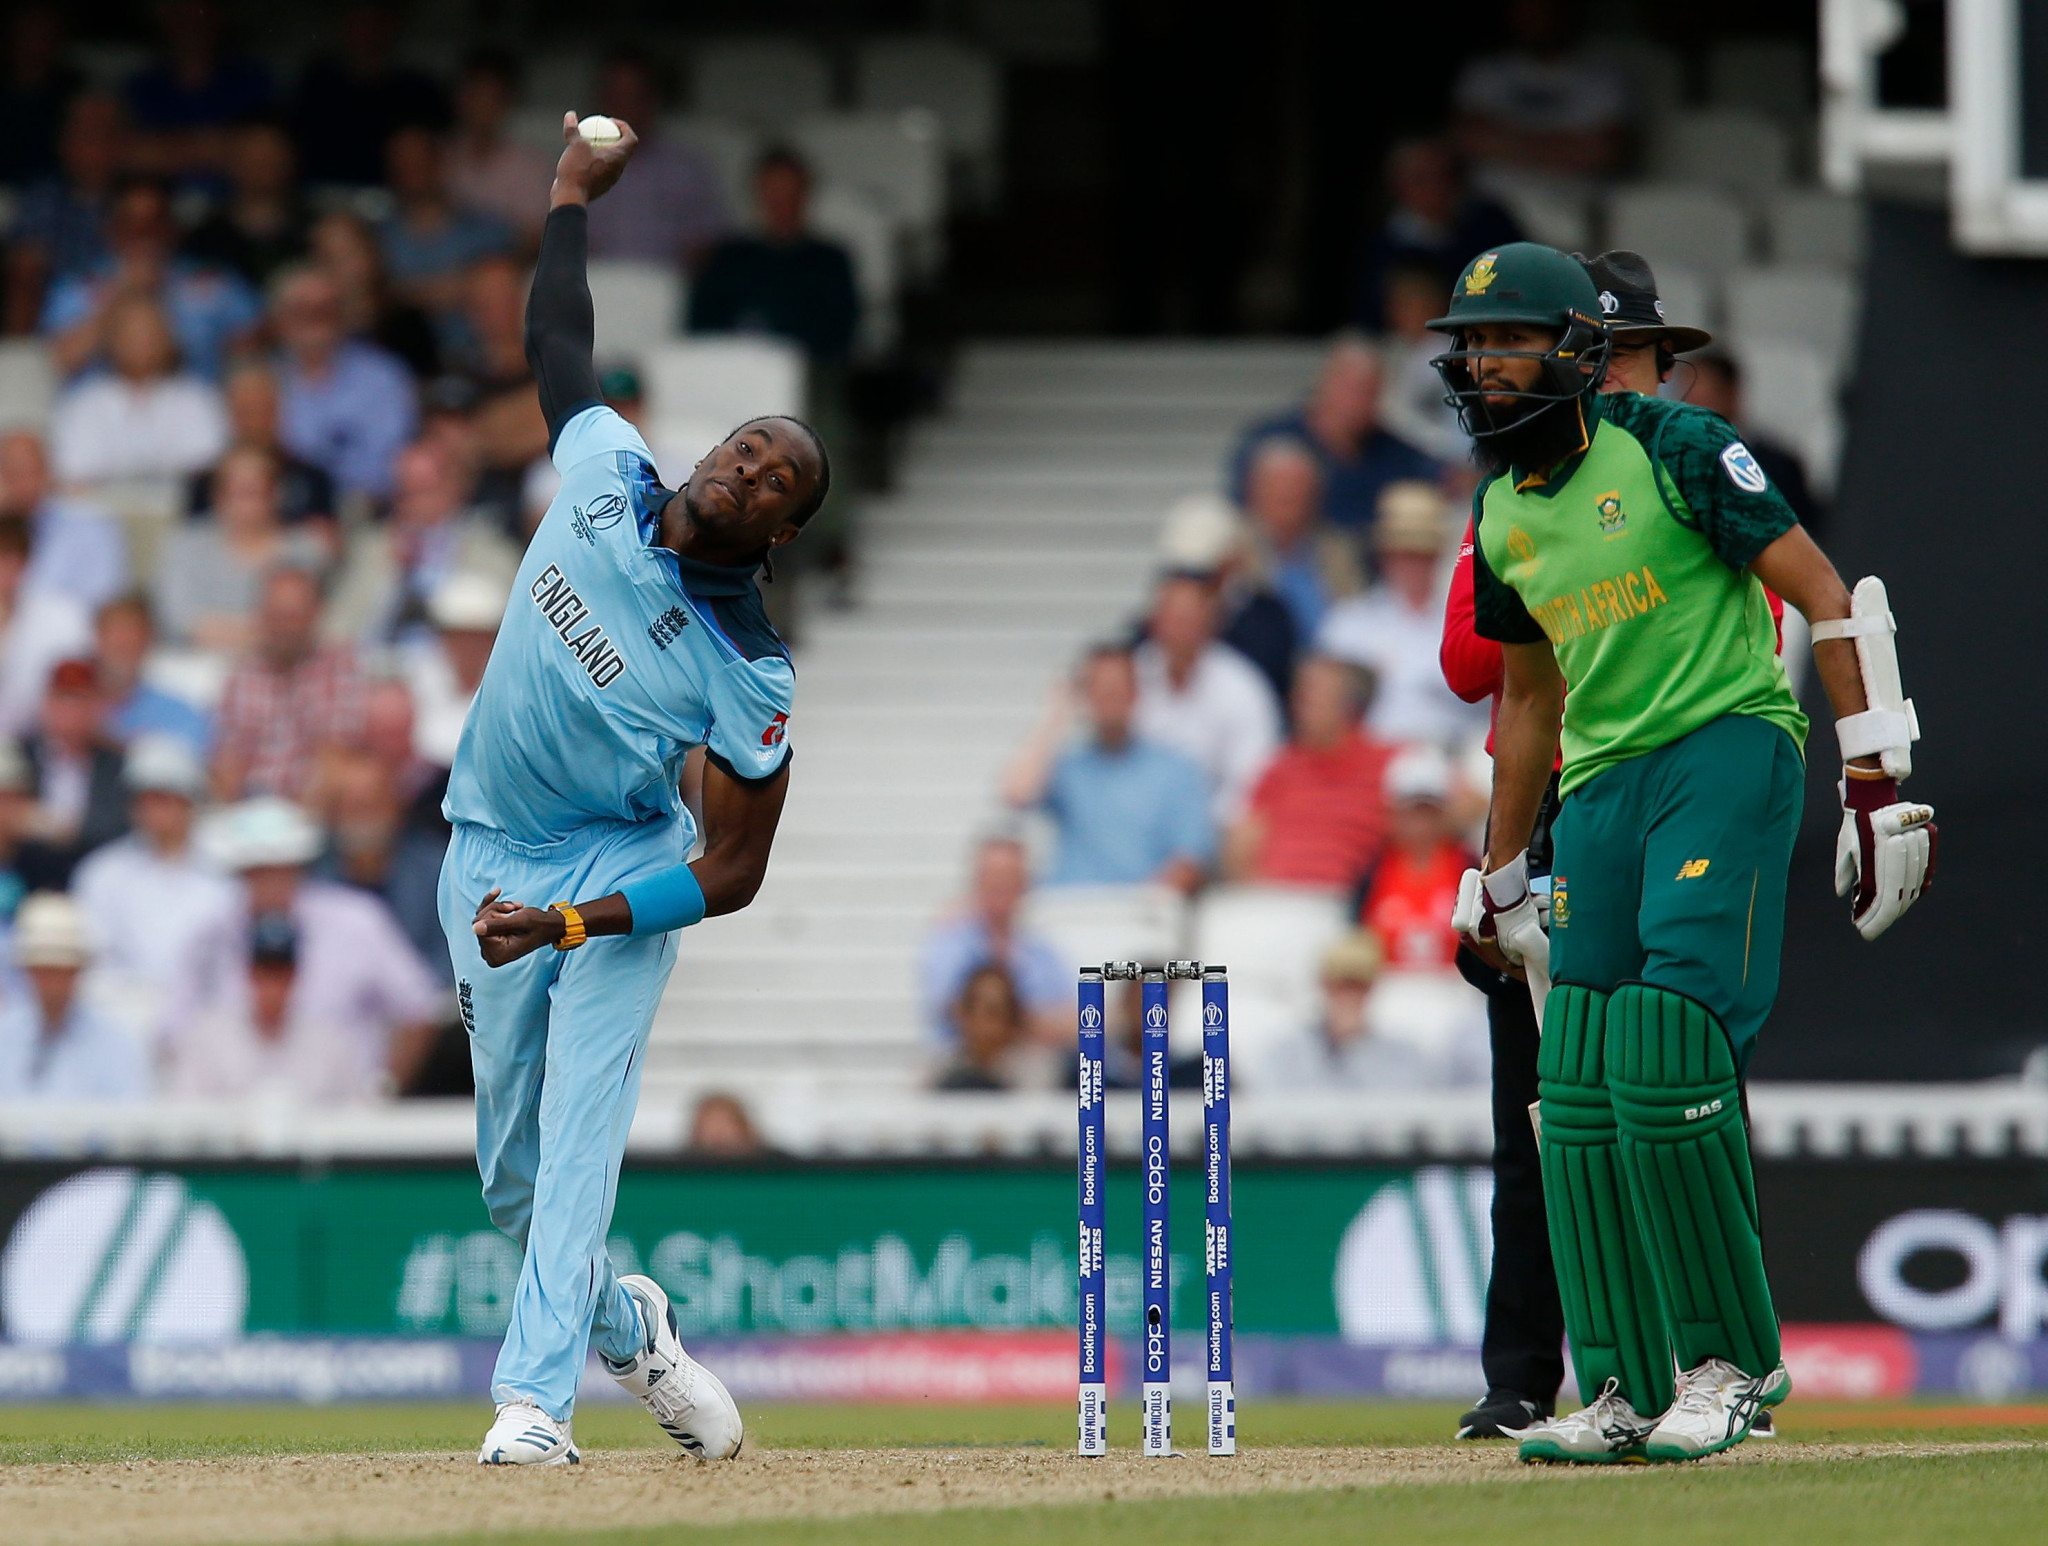 England beat South Africa in the 2019 ICC Cricket World Cup opener ©Getty Images